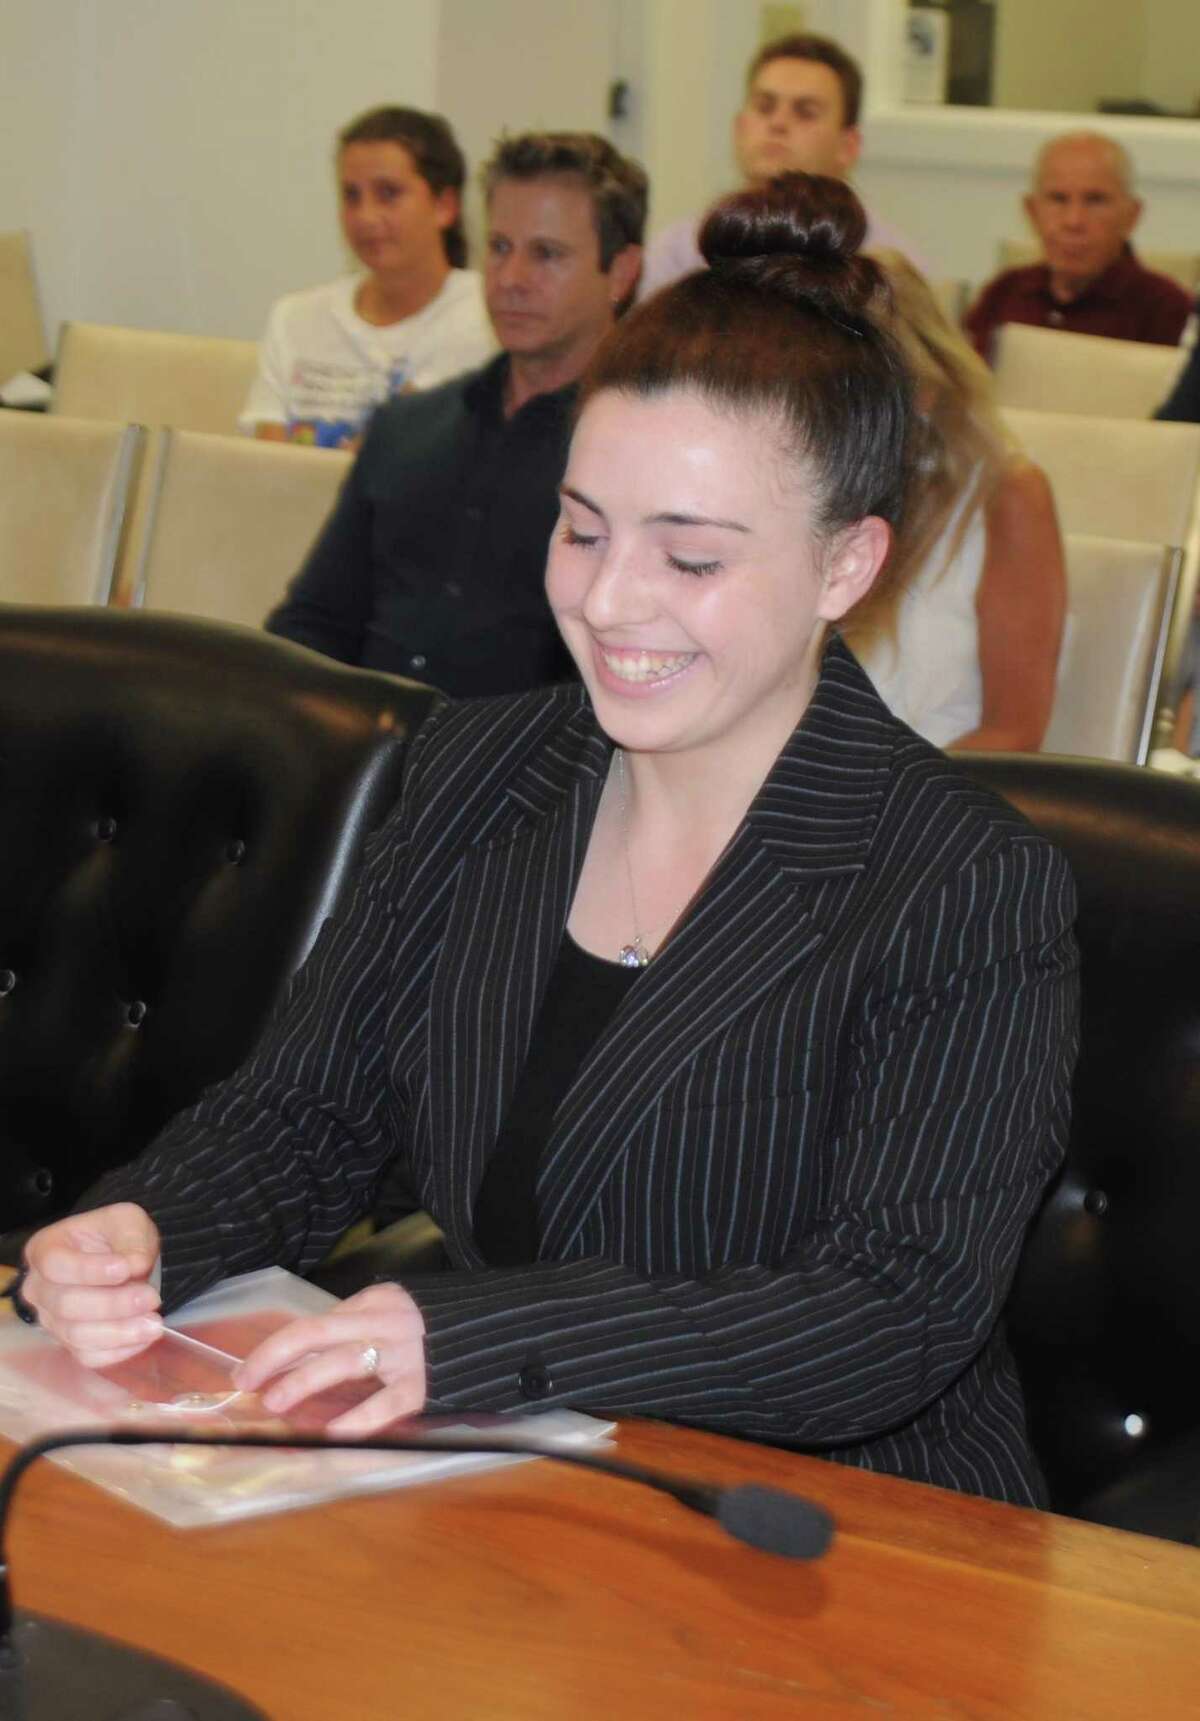 Siera Fergosi, a student intern in town hall, presented the Board of Selectmen with a proposal to create a town-wide sports code of conduct to be posted at playing fields. The plan would need approval from several town boards and also sports groups.